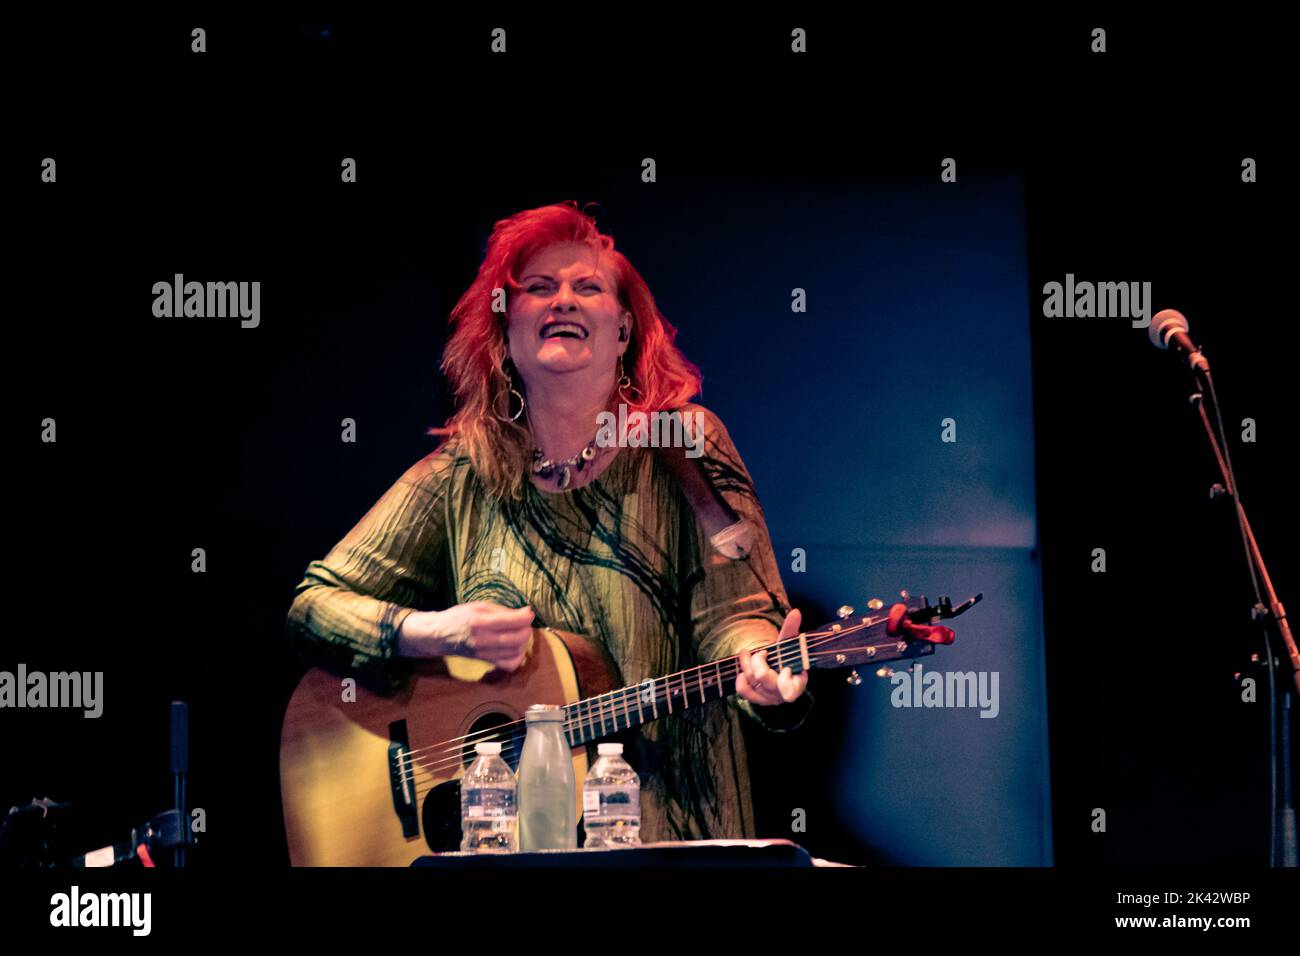 Eddi Reader at Sage Gateshead. 40th Anniversary Tour. Sadenia 'Eddi' Reader MBE is a Scottish singer-songwriter, known for her work as frontwoman of Fairground Attraction and for an enduring solo career. She is the recipient of three BRIT Awards. In 2003, she showcased the works of Scotland's national poet, Robert Burns. United Kingdom. Stock Photo